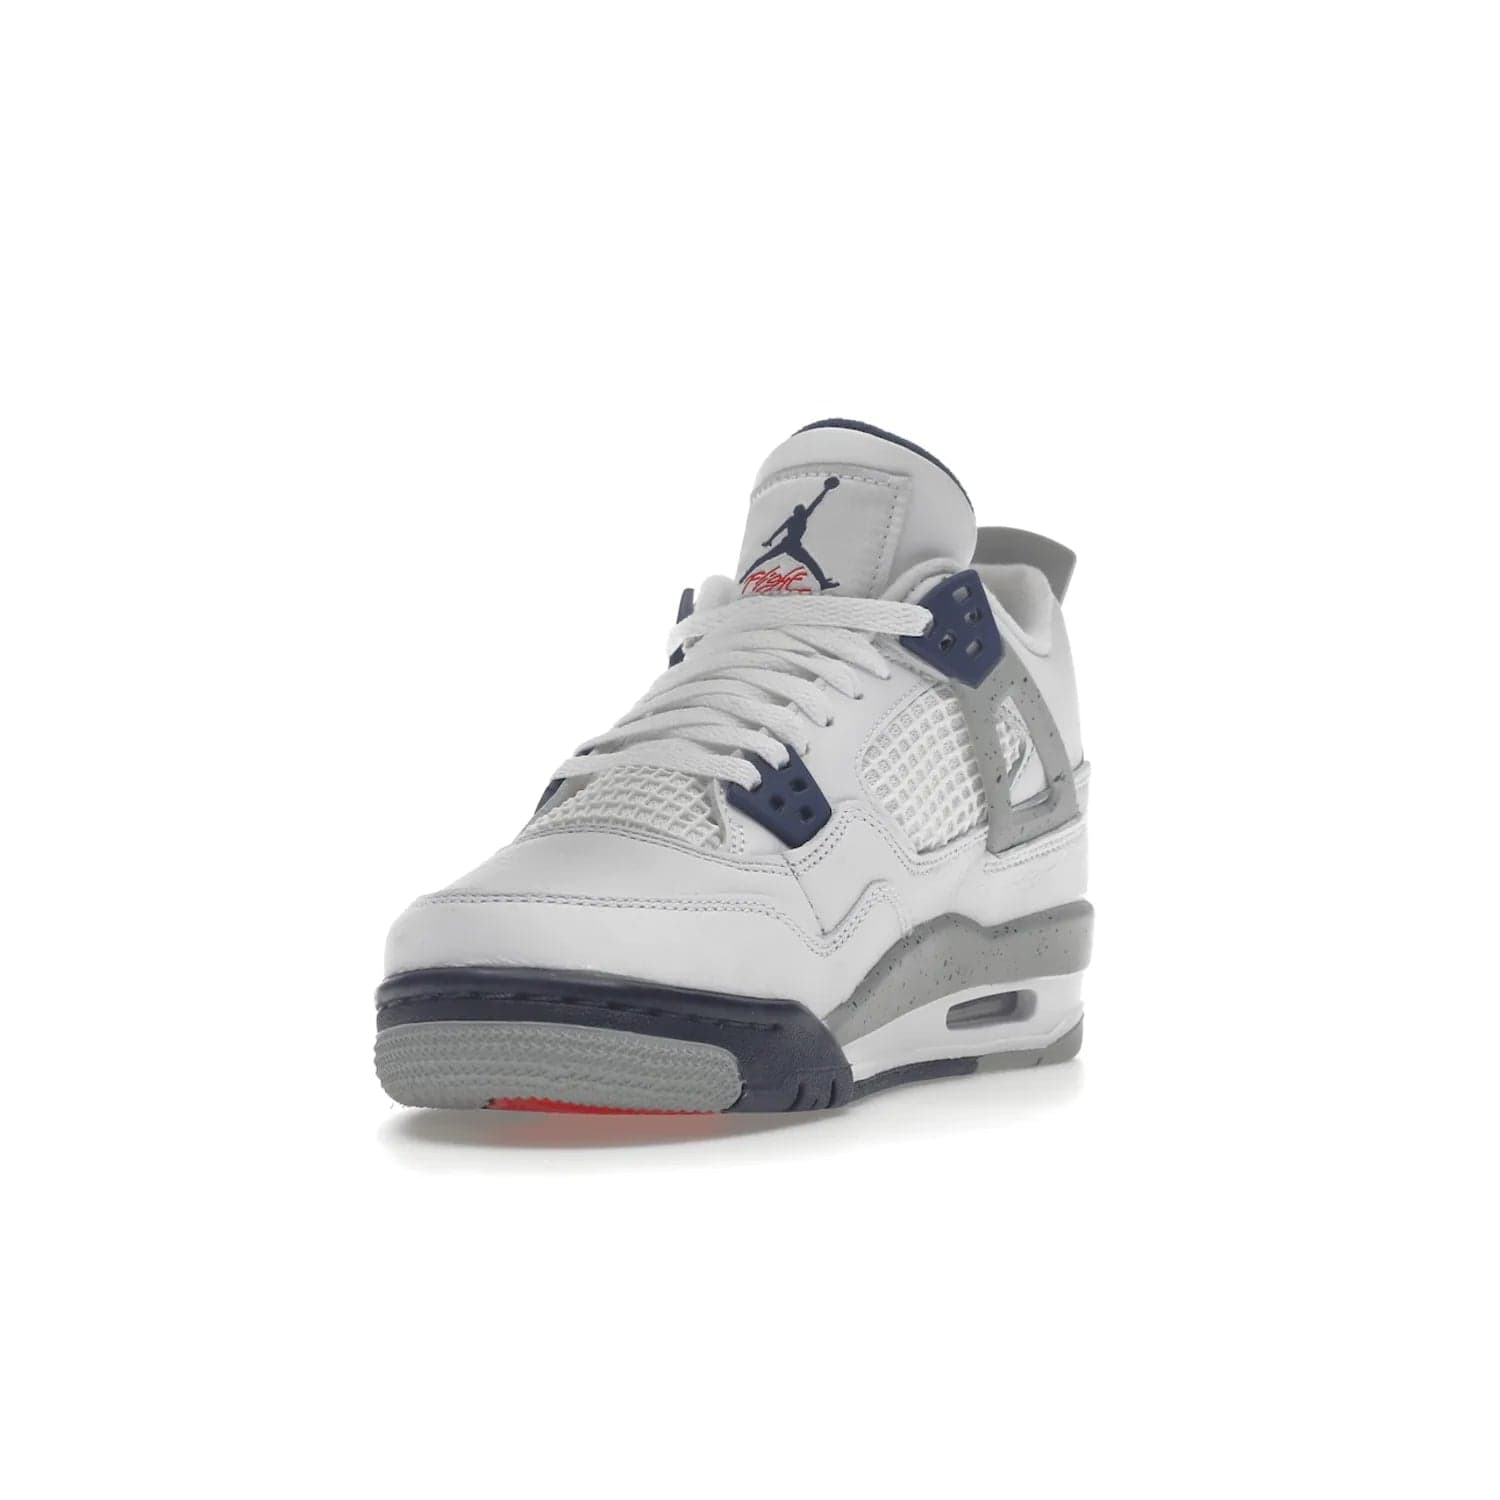 Jordan 4 Retro Midnight Navy (GS) - Image 13 - Only at www.BallersClubKickz.com - Shop the Air Jordan 4 Retro Midnight Navy GS. The white leather upper features black support wings & heel tab, navy eyelets & woven tongue tag with Jumpman logos. The midsole features two-tone polyurethane insole & AIR units in the heel & forefoot. Get the white/midnight navy/light smoke grey/fire colorway & show off your style.